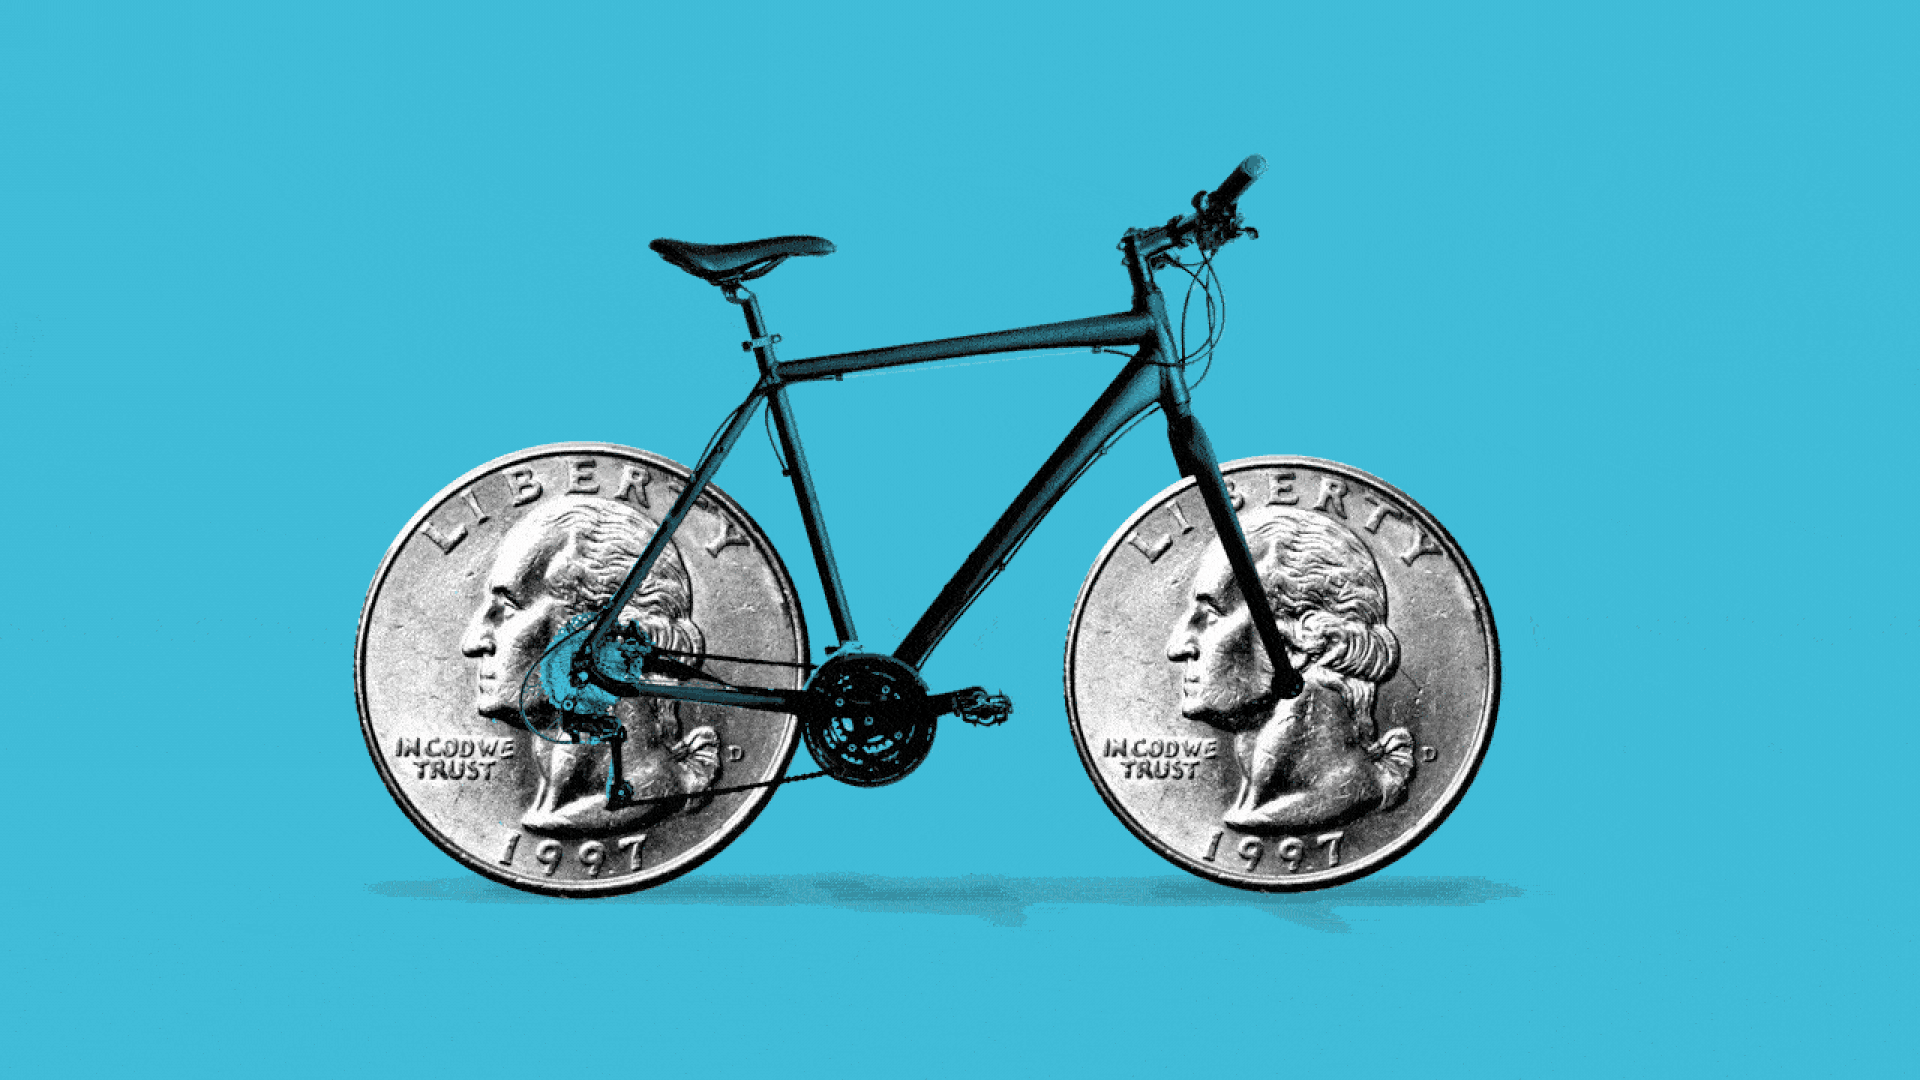 Illustration of a bike with quarters for wheels.